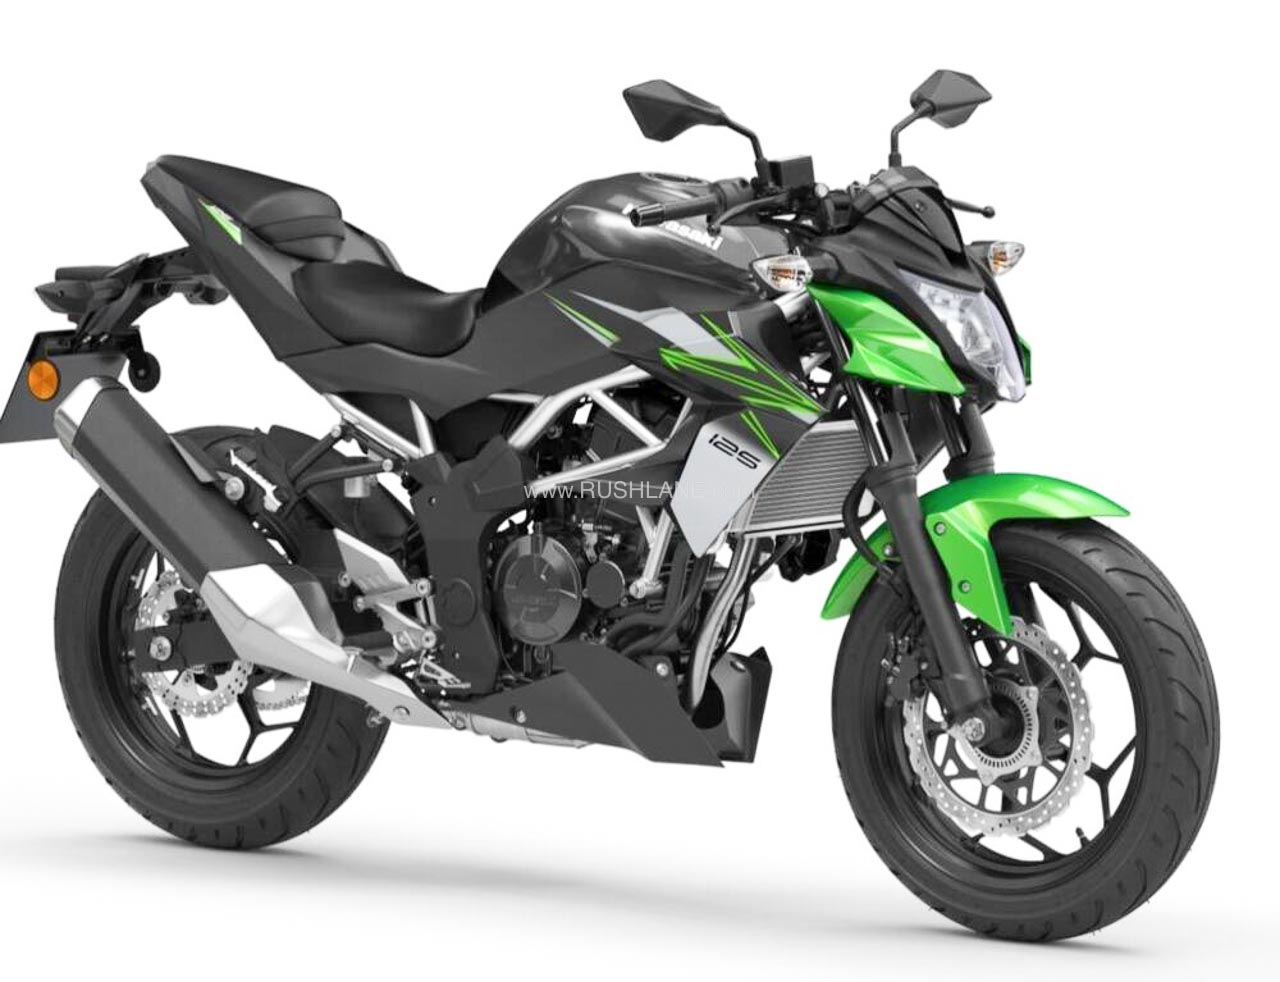 værdighed vægt solid Kawasaki 125cc Range Updated For 2022 - Debuts With New Colours